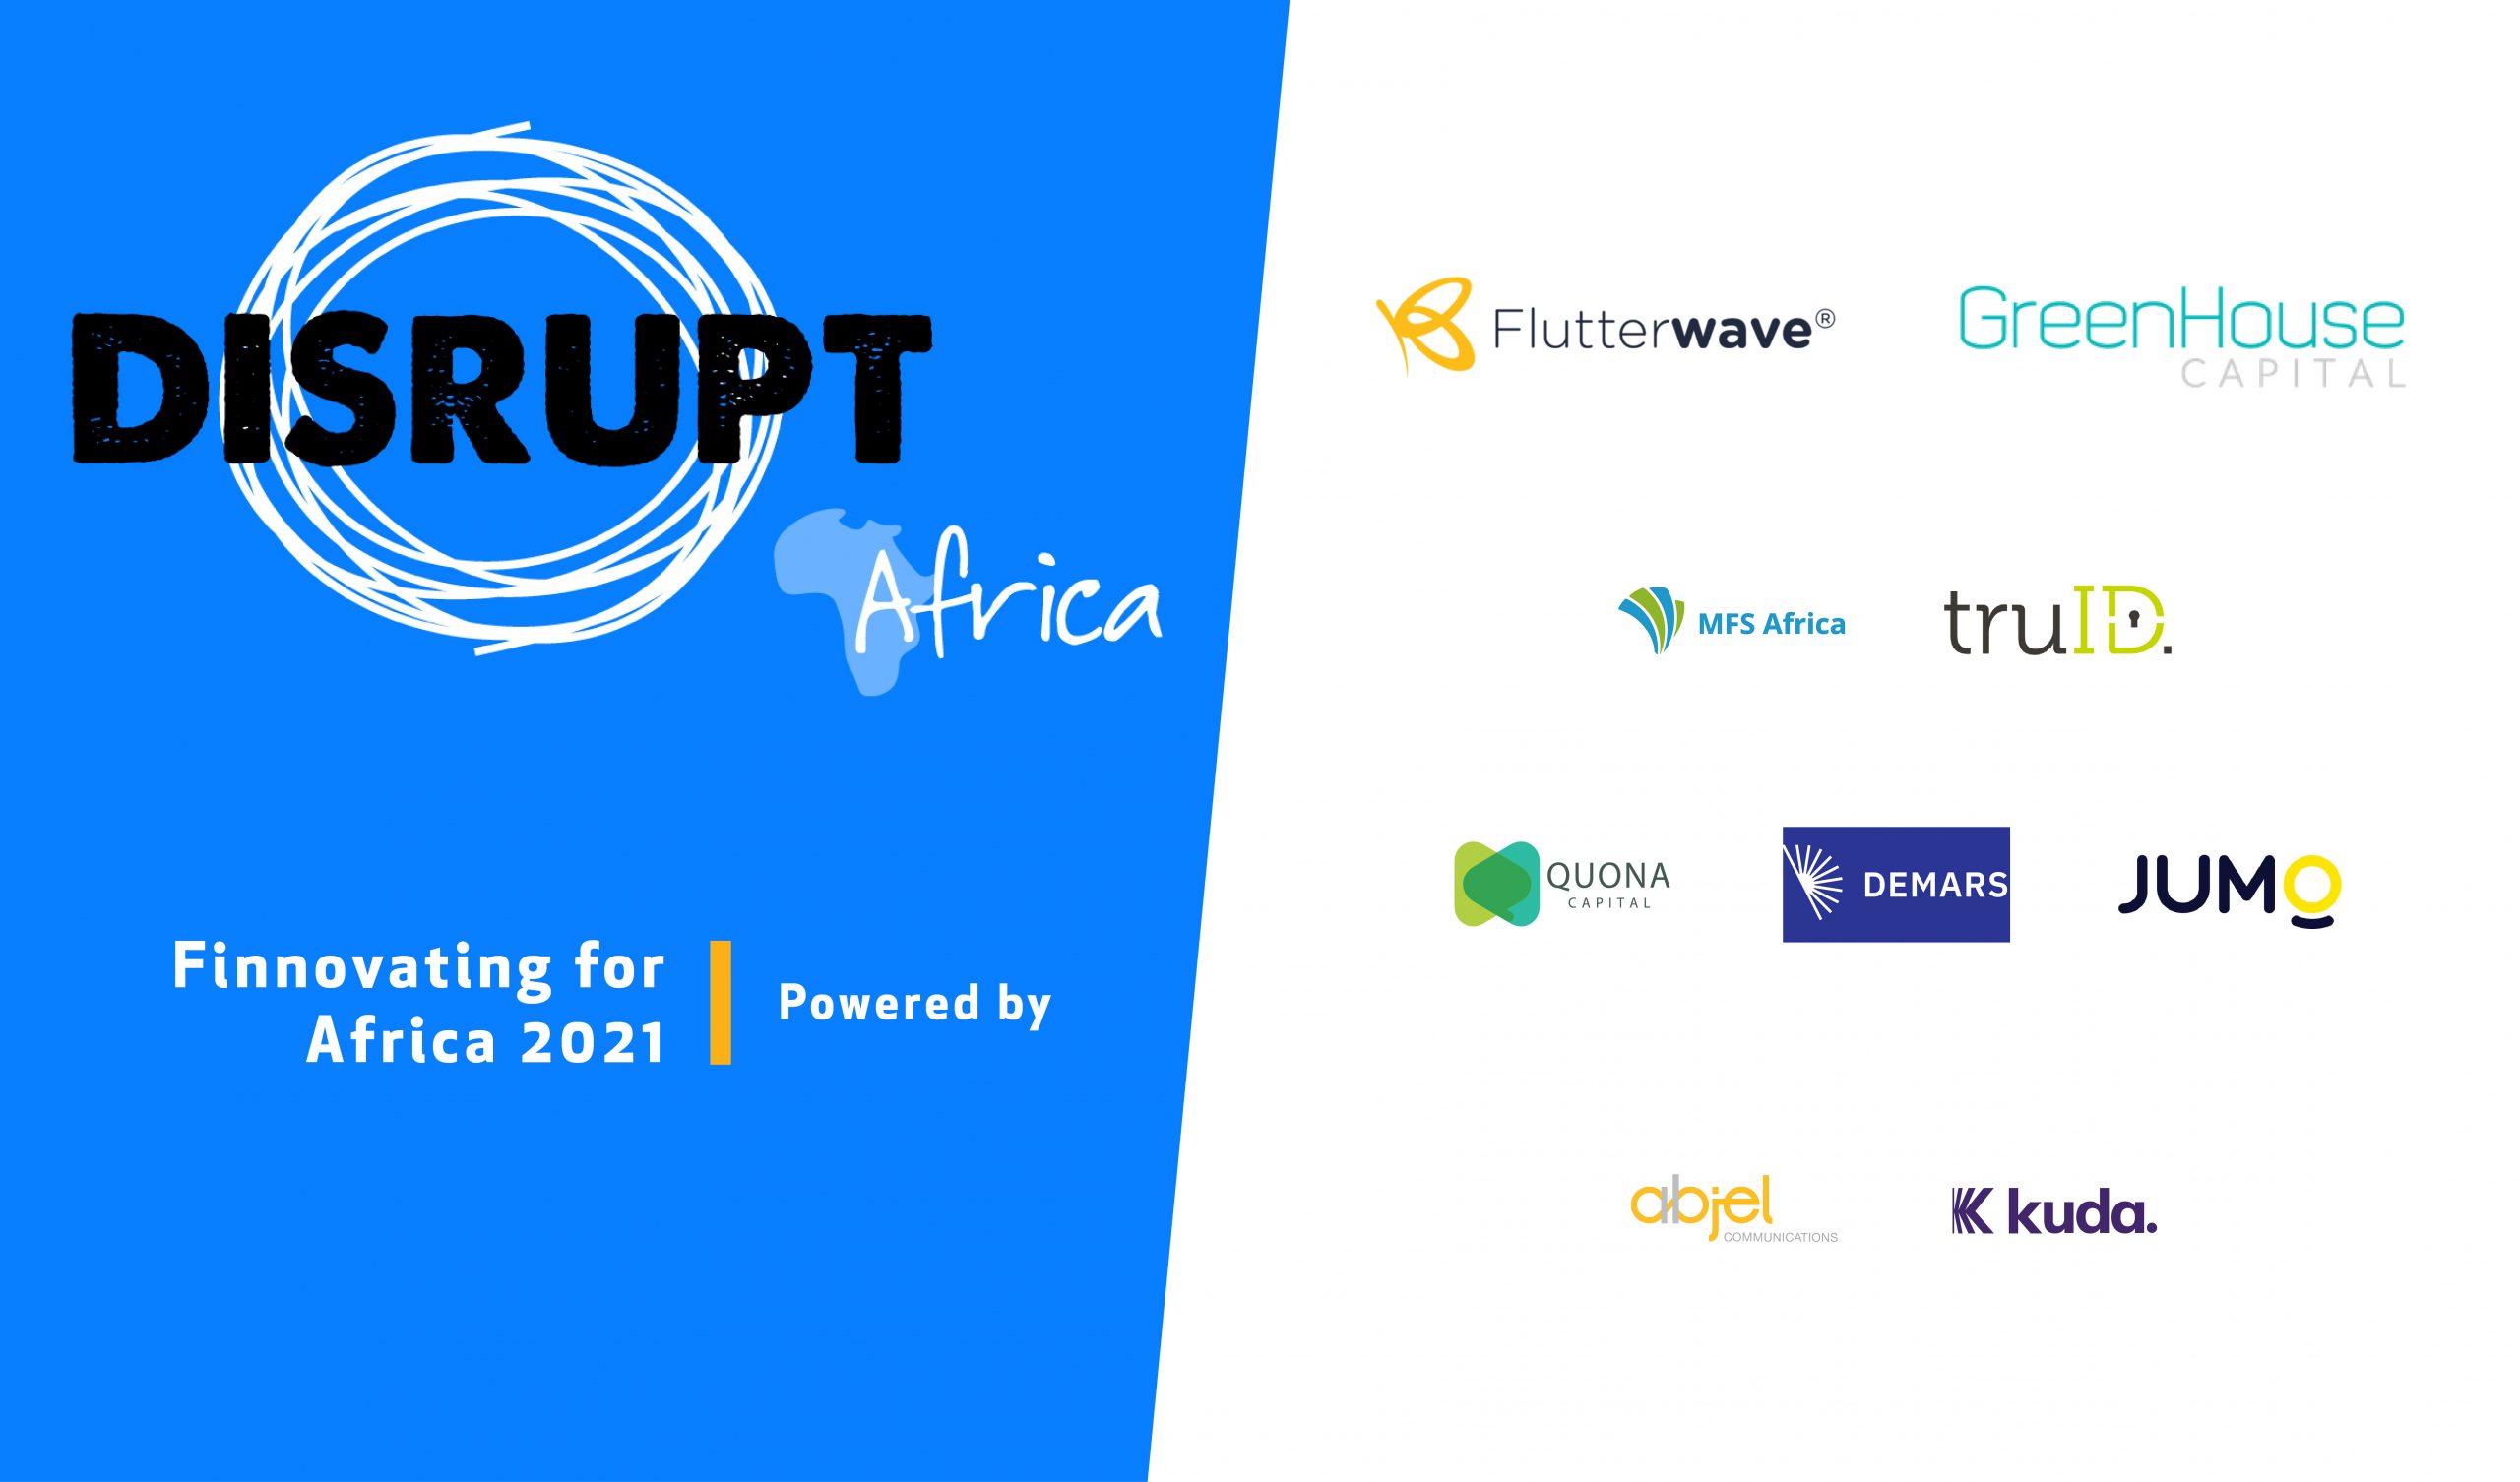 Disrupt Africa partners Flutterwave, GreenHouse Capital to open-source flagship fintech report